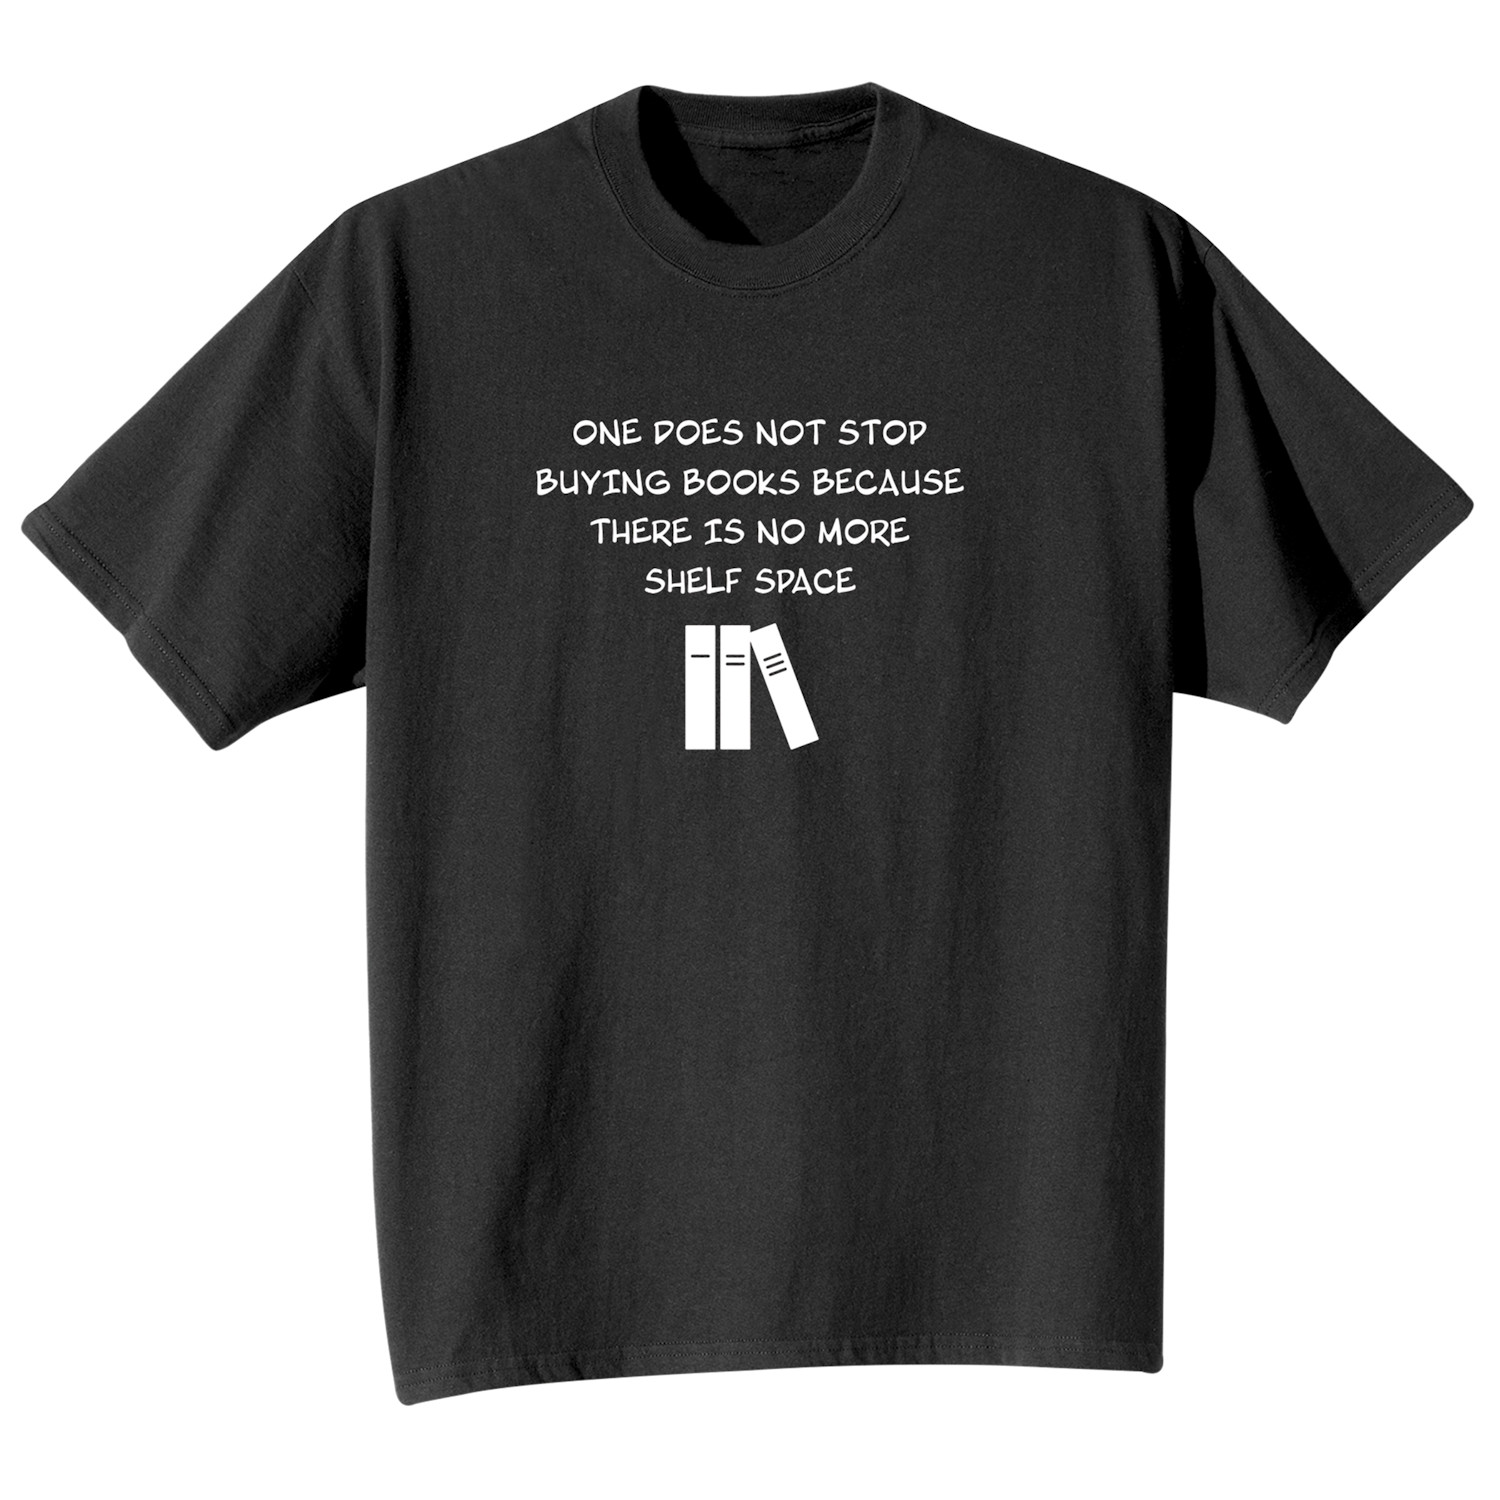 Product image for Stop Buying Books T-Shirt or Sweatshirt